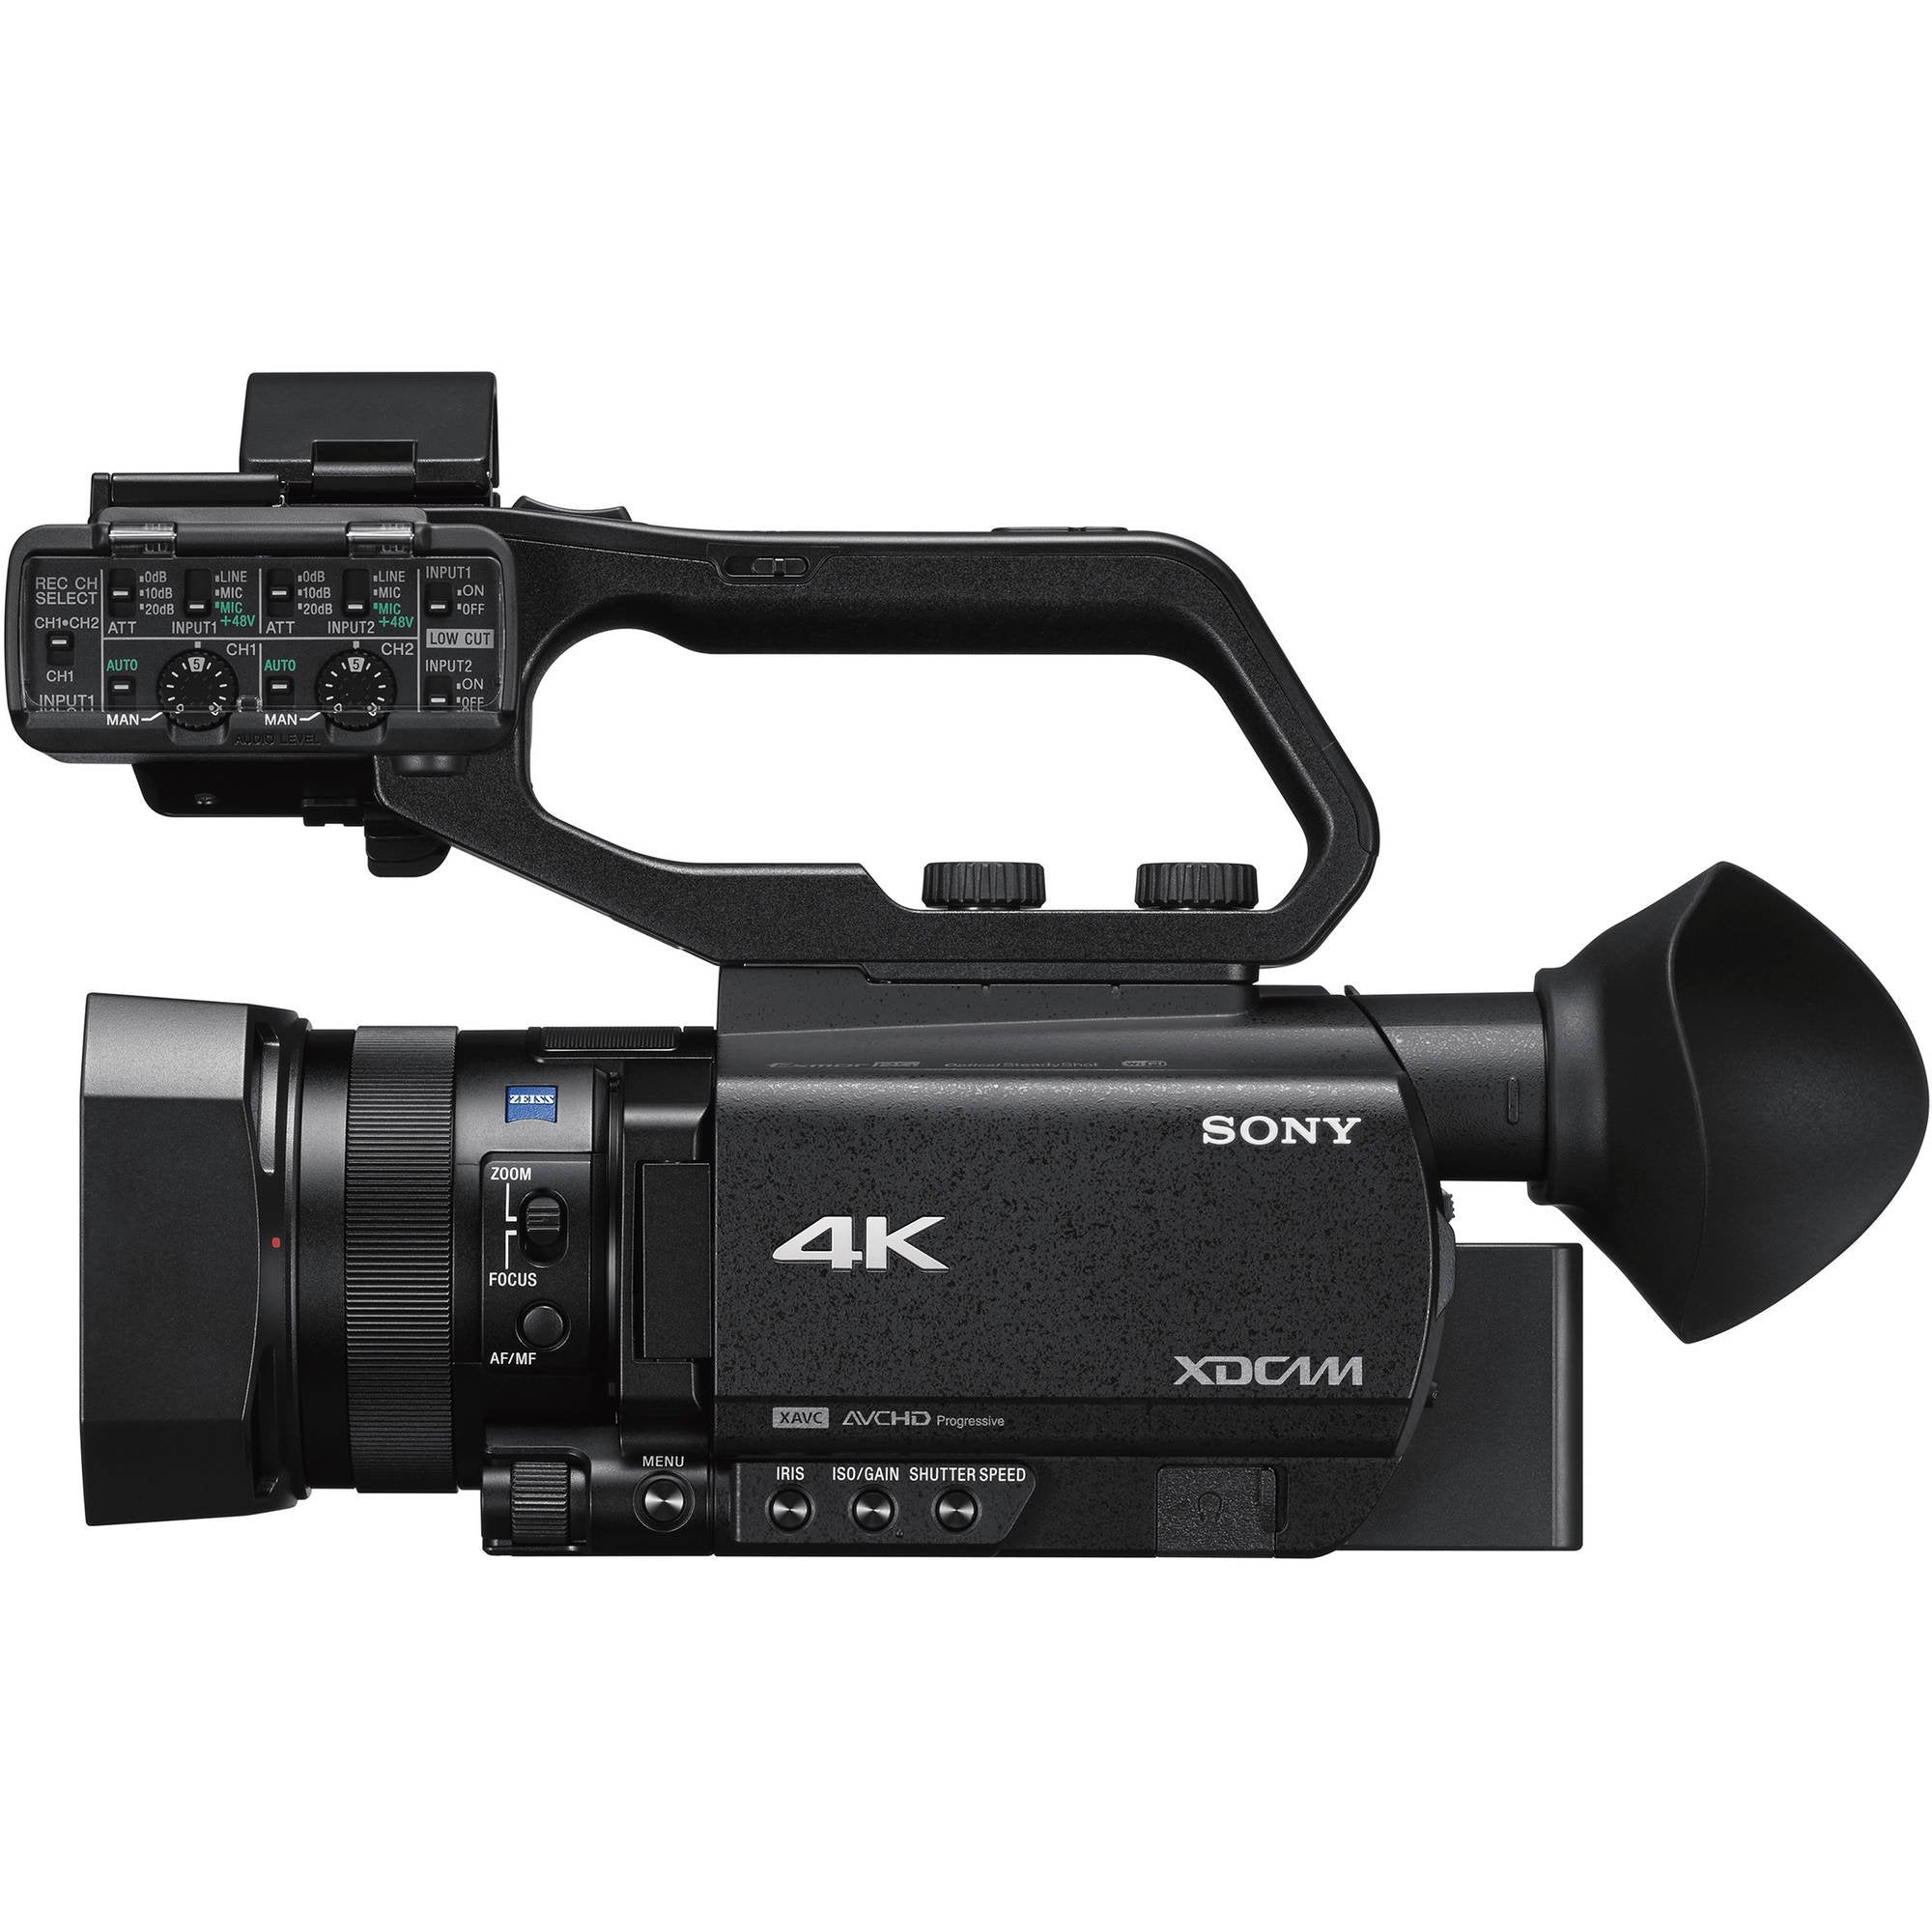 Sony PXW-Z90V 4K HDR XDCAM with Fast Hybrid AF + 32GB SDHC Class 10 Memory Card + 62mm UV Filter + Carrying Case + Microfiber Cleaning Cloth + Deluxe Cleaning Kit Bundle International Version